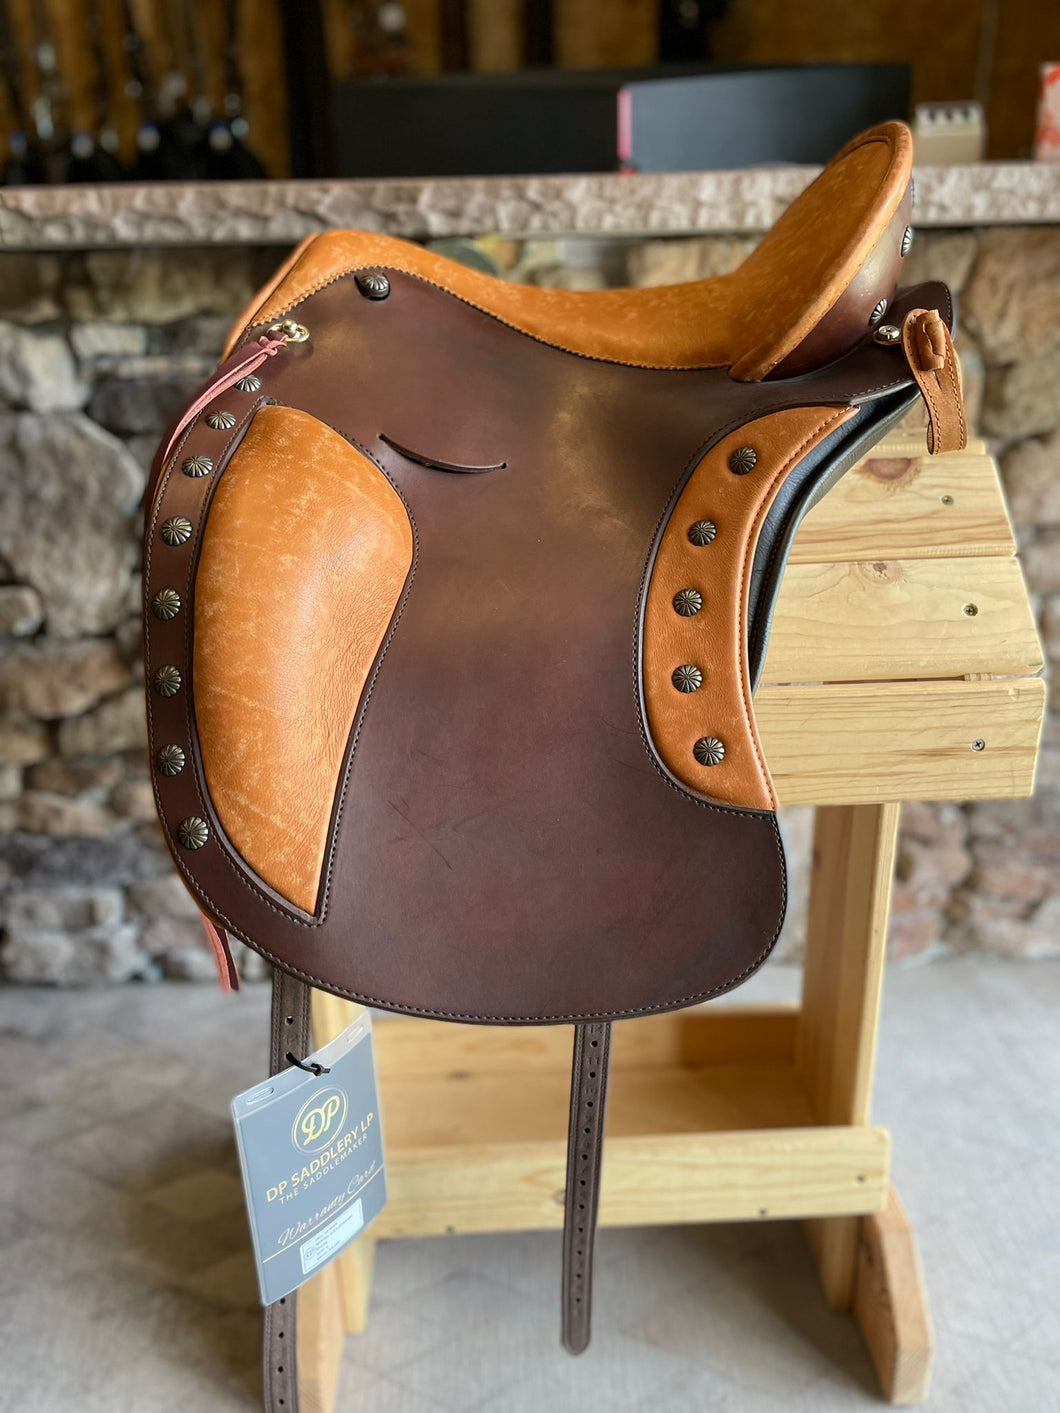 dp saddlery el campo shorty 6099, side view on a wooden saddle rack